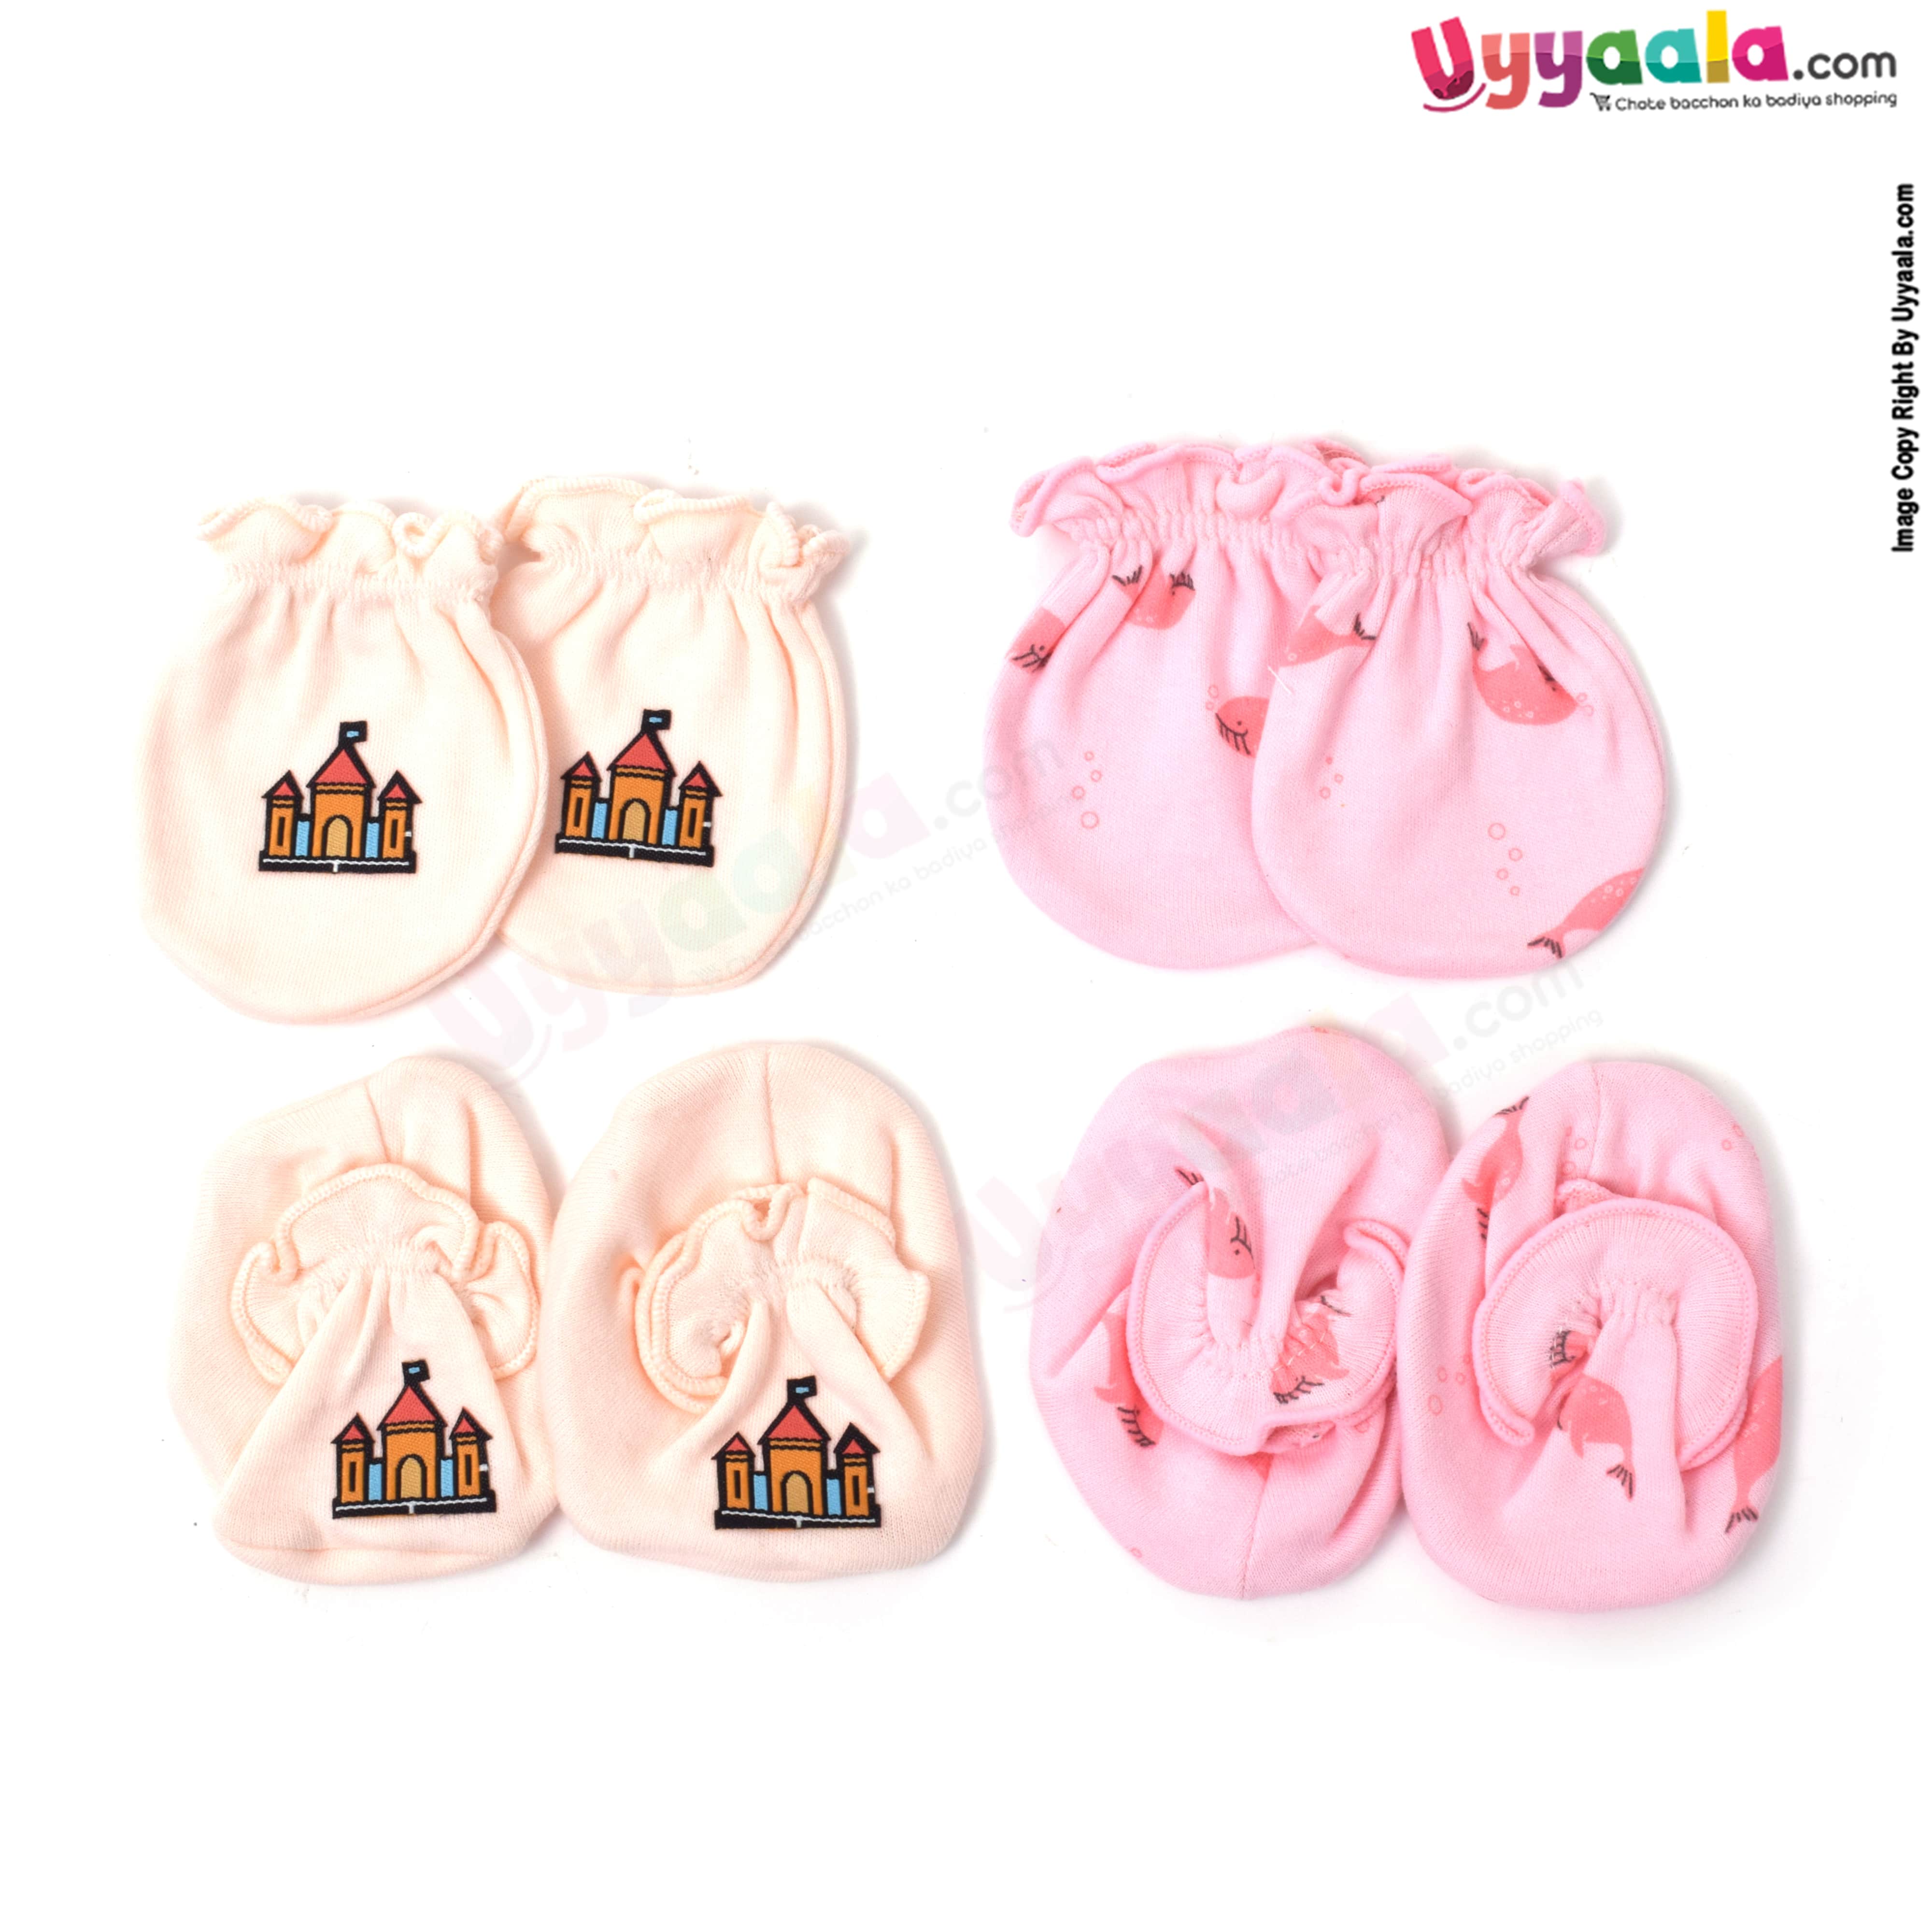 BEN BENNY mittens & booties set for babies with dolphin and fort print (0-3M) - pink & cream